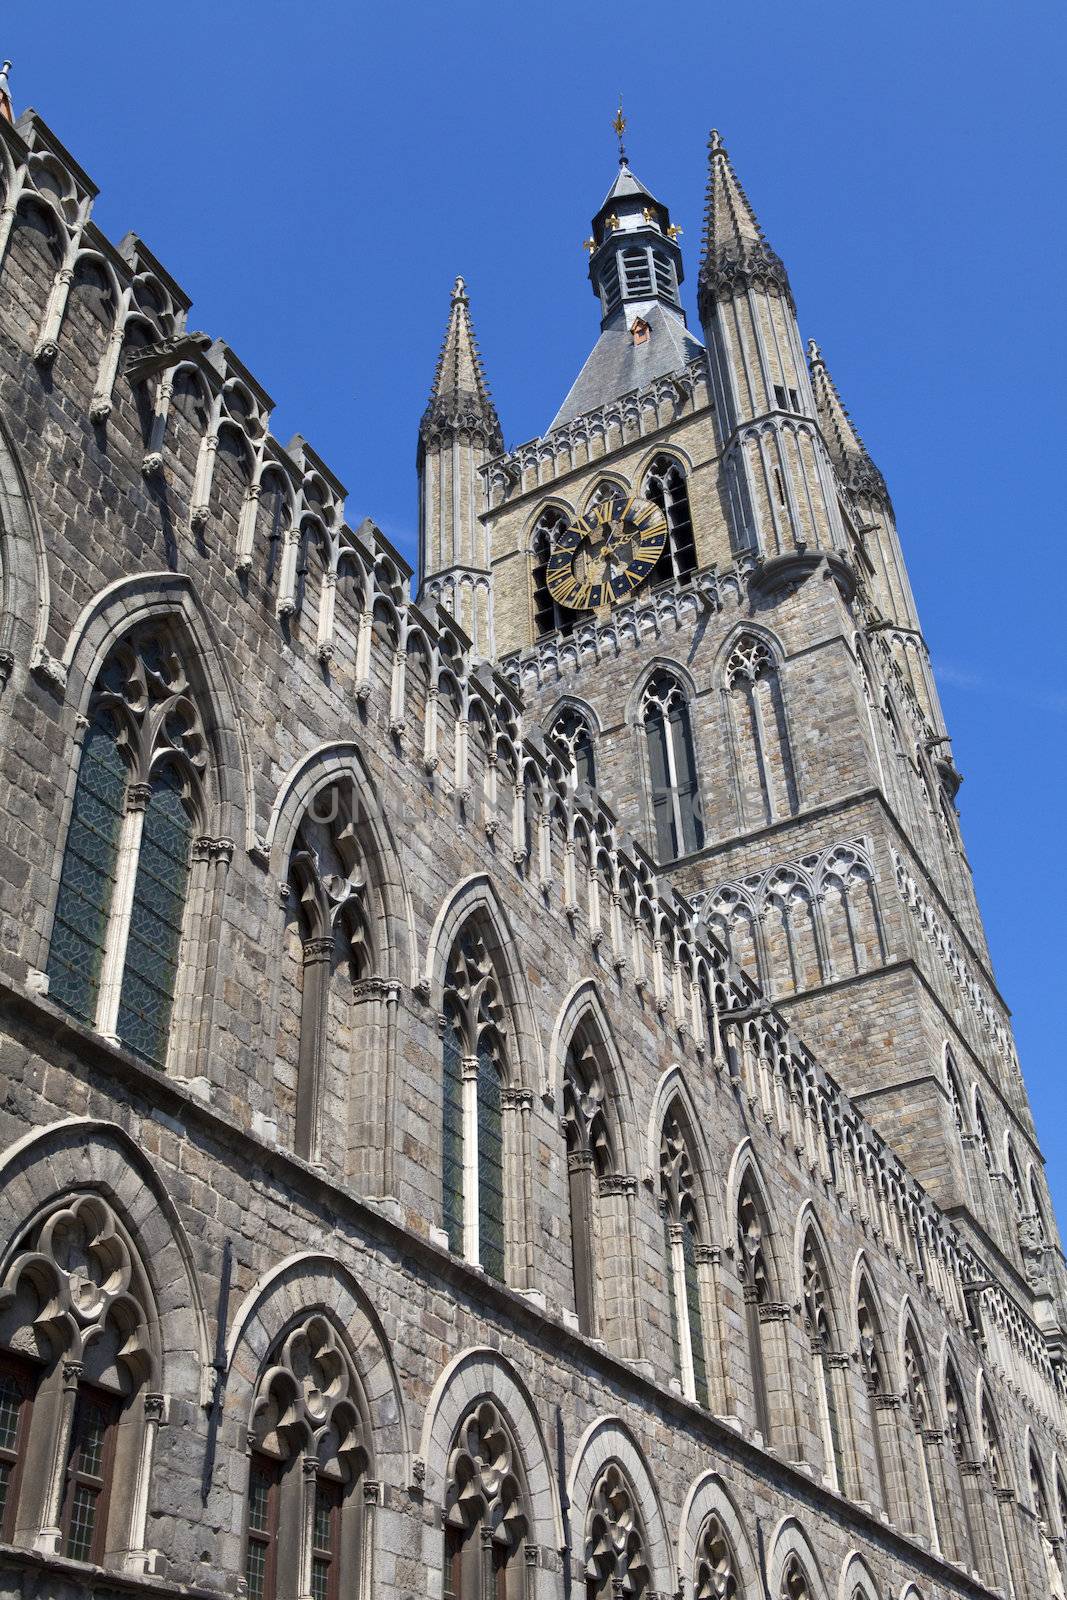 Looking up at Cloth Hall in Ypres, Belgium.